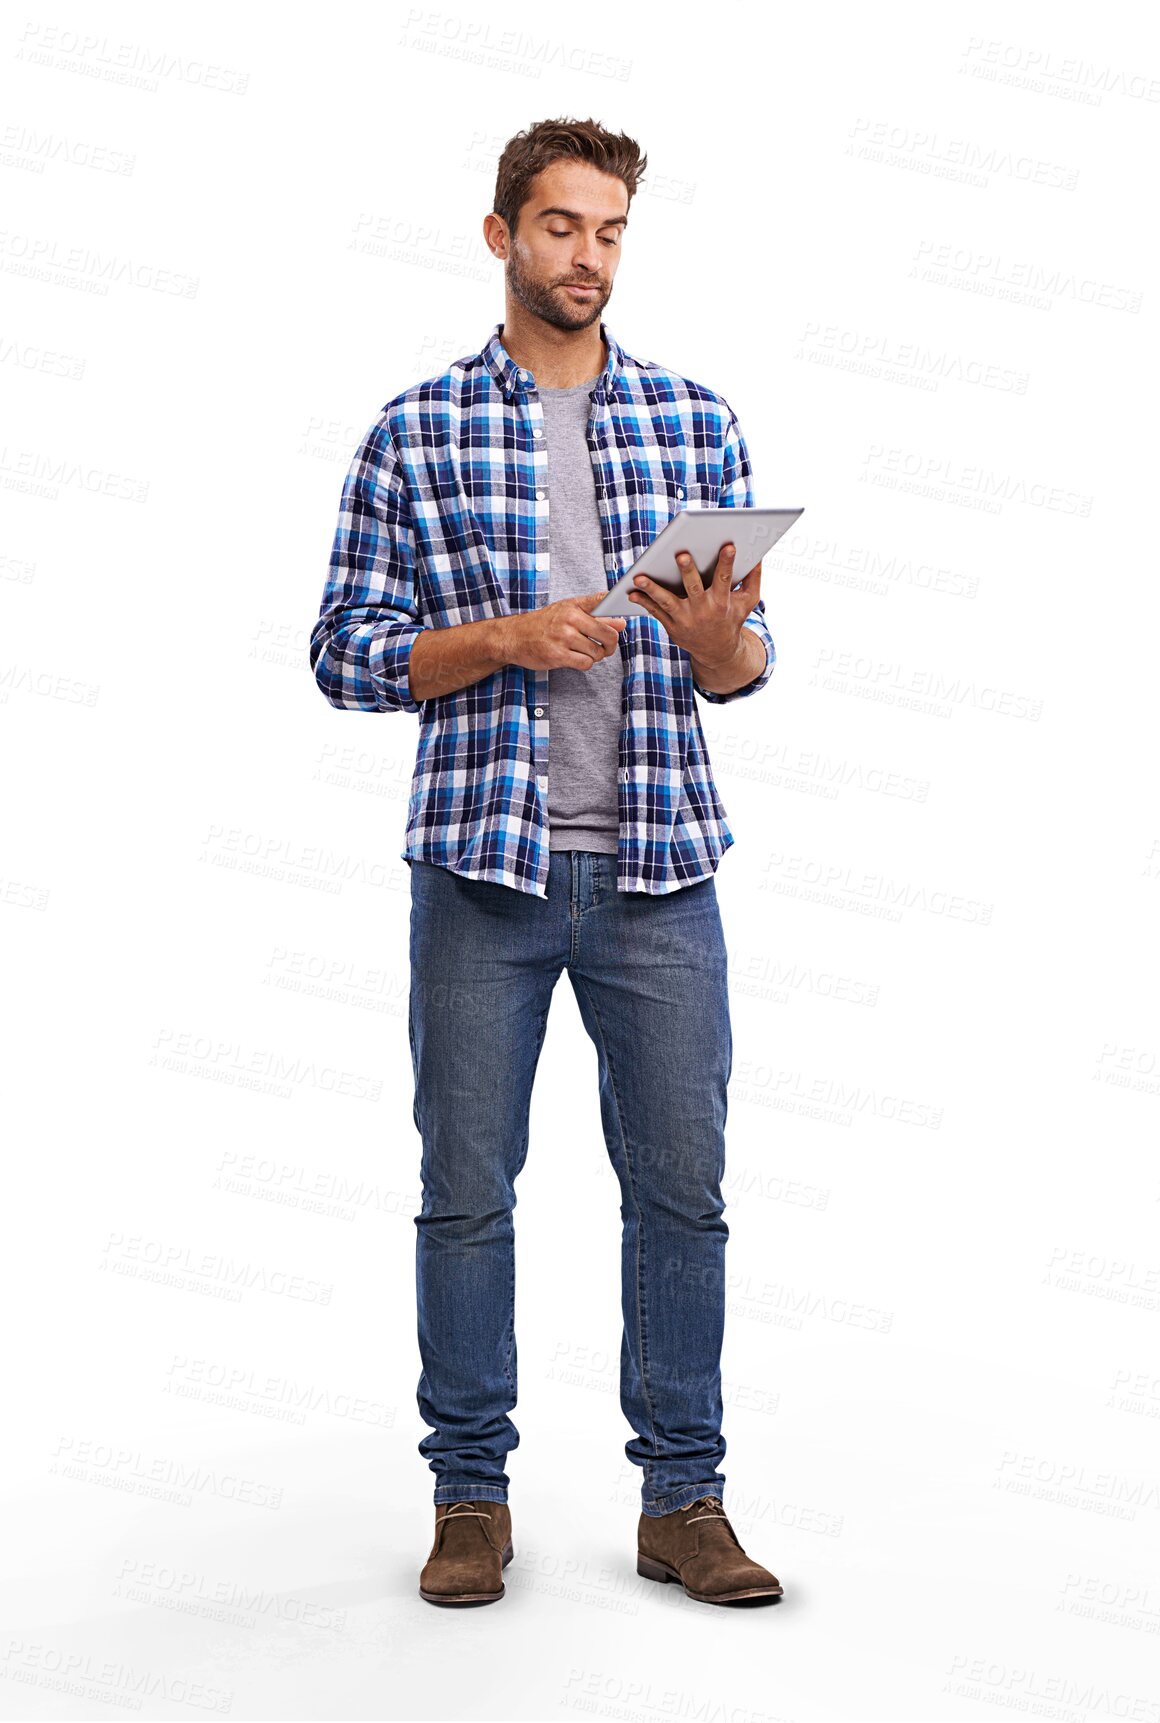 Buy stock photo Isolated young man, tablet and reading with focus, research or learning by transparent png background. Student guy, touchscreen and tech for social media app, movie or video on web, internet or game